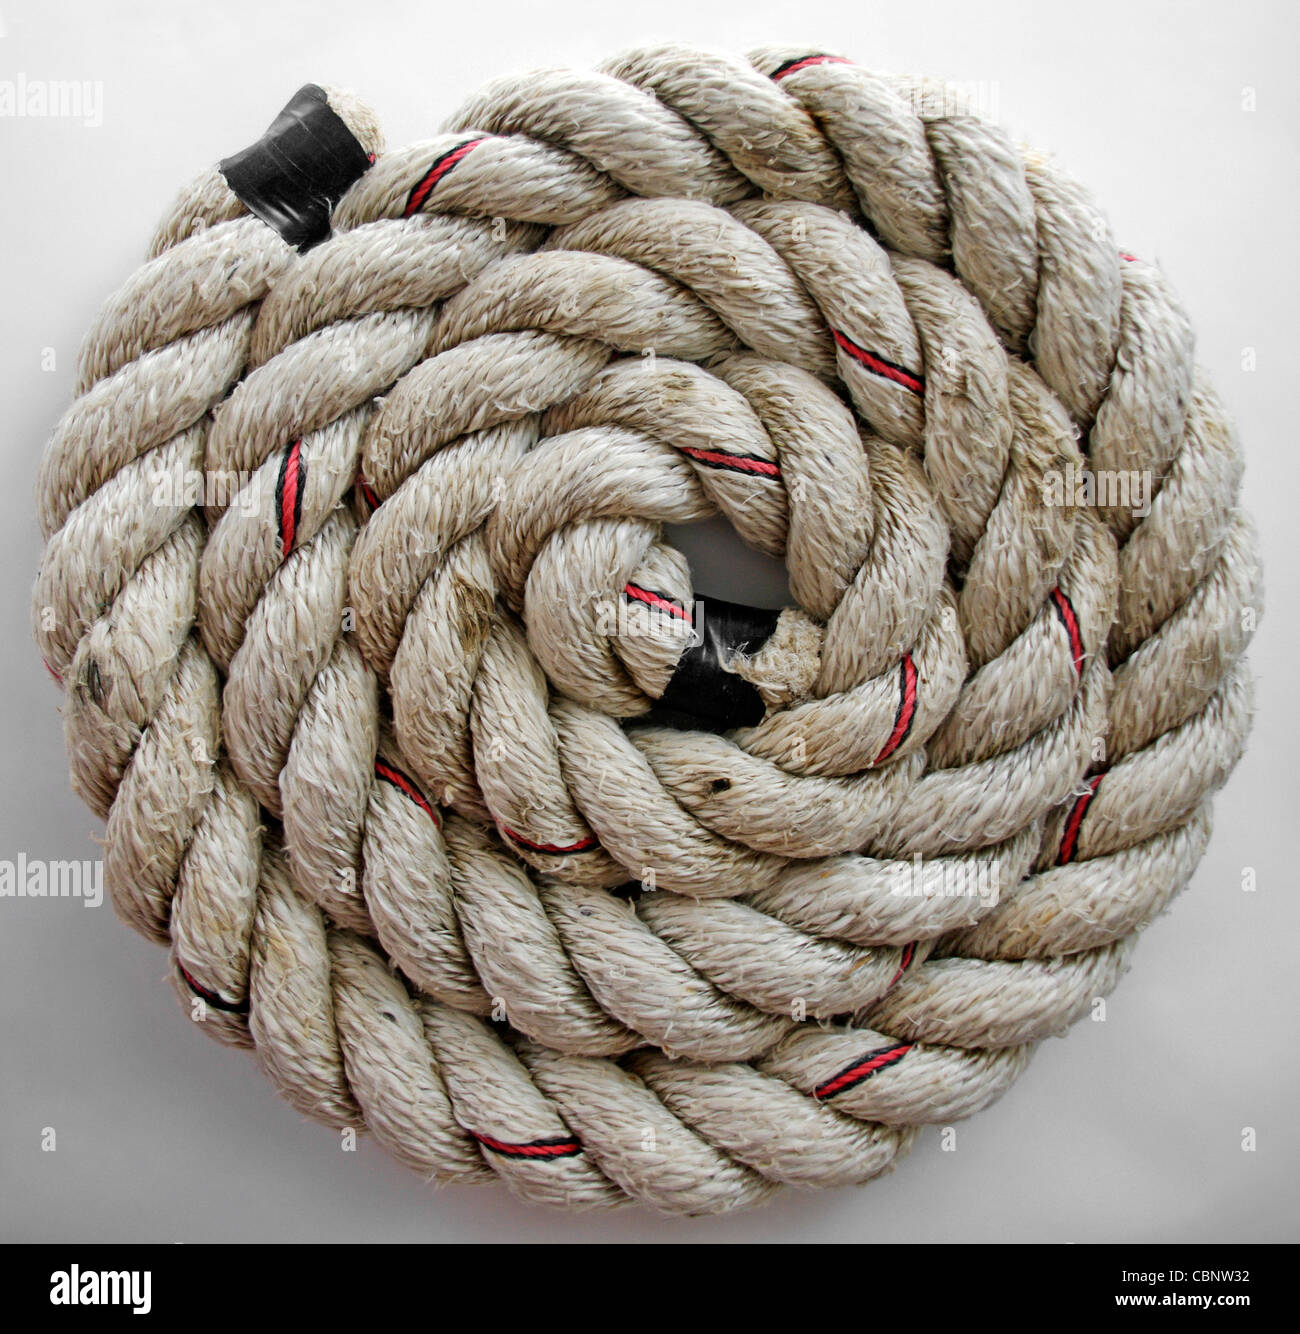 https://c8.alamy.com/comp/CBNW32/coiled-thick-twisted-white-marine-rope-CBNW32.jpg